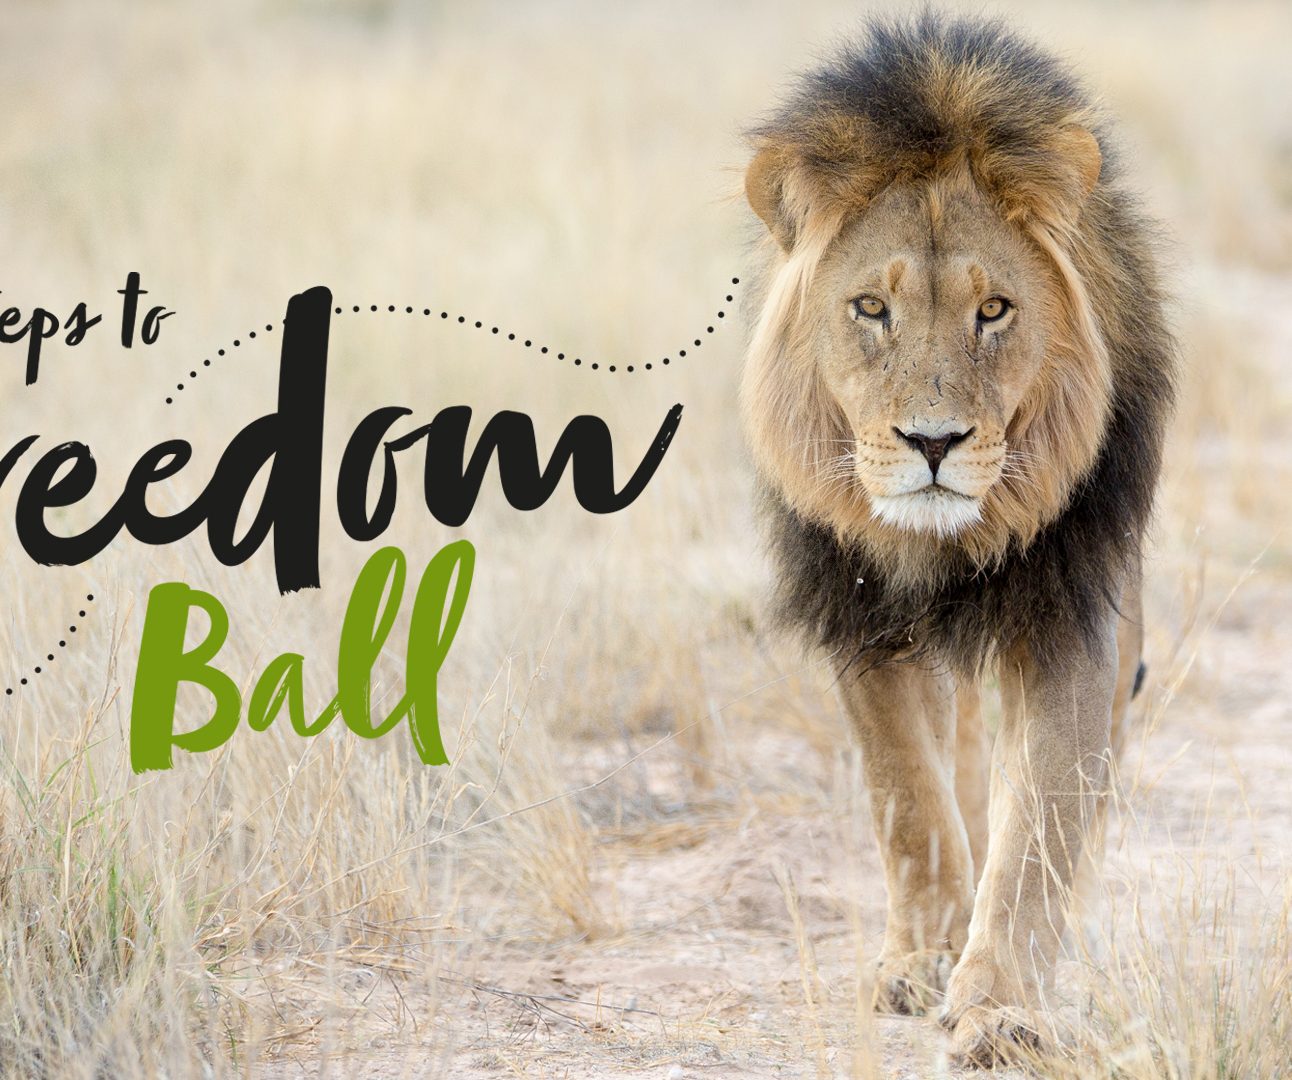 A big male lion with his black mane walking in the grass field savannah, text reads 'Footsteps to Freedom Ball'